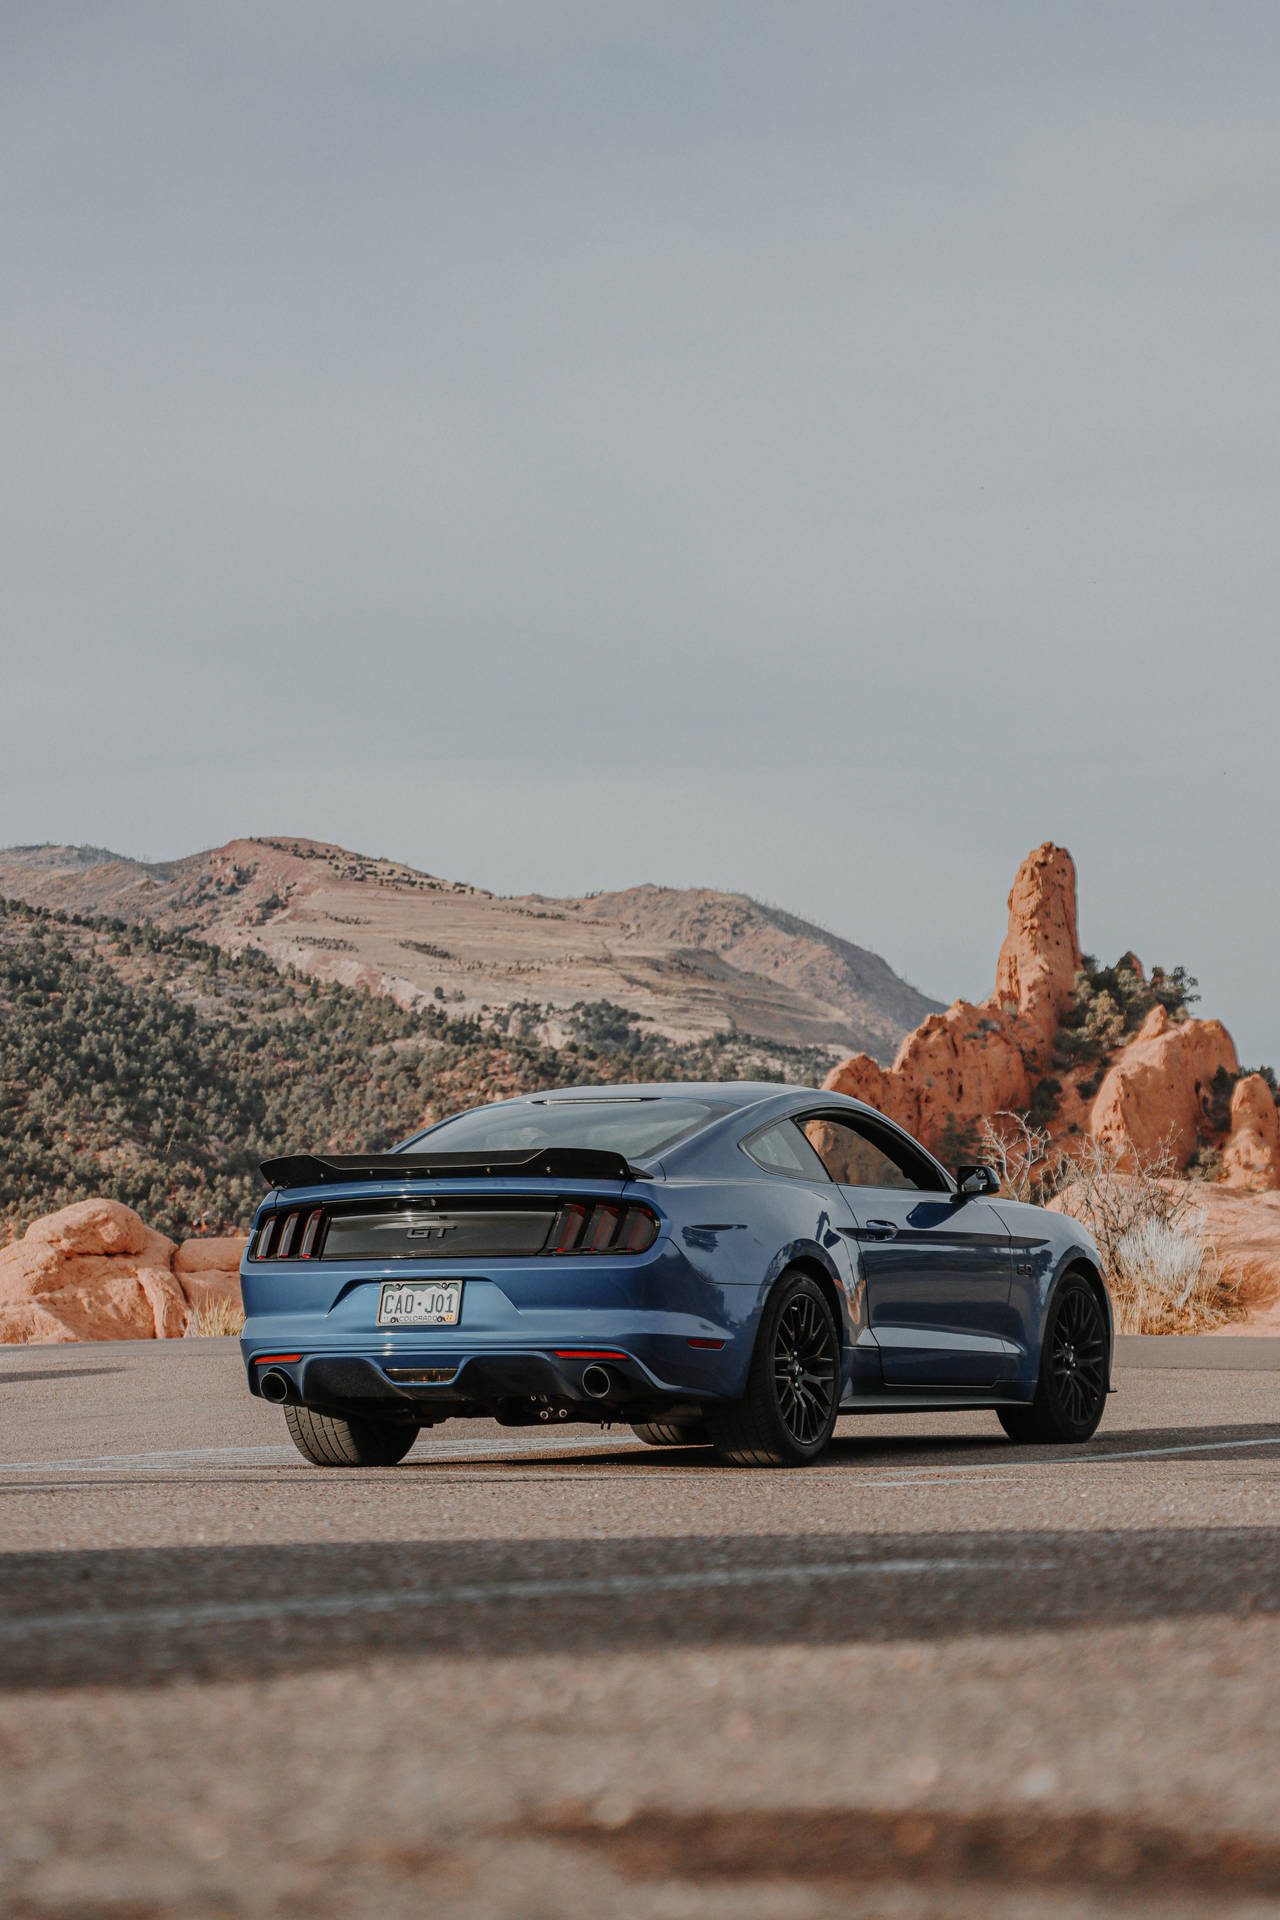 A Blue Ford Mustang Gt Parked In The Desert Wallpaper